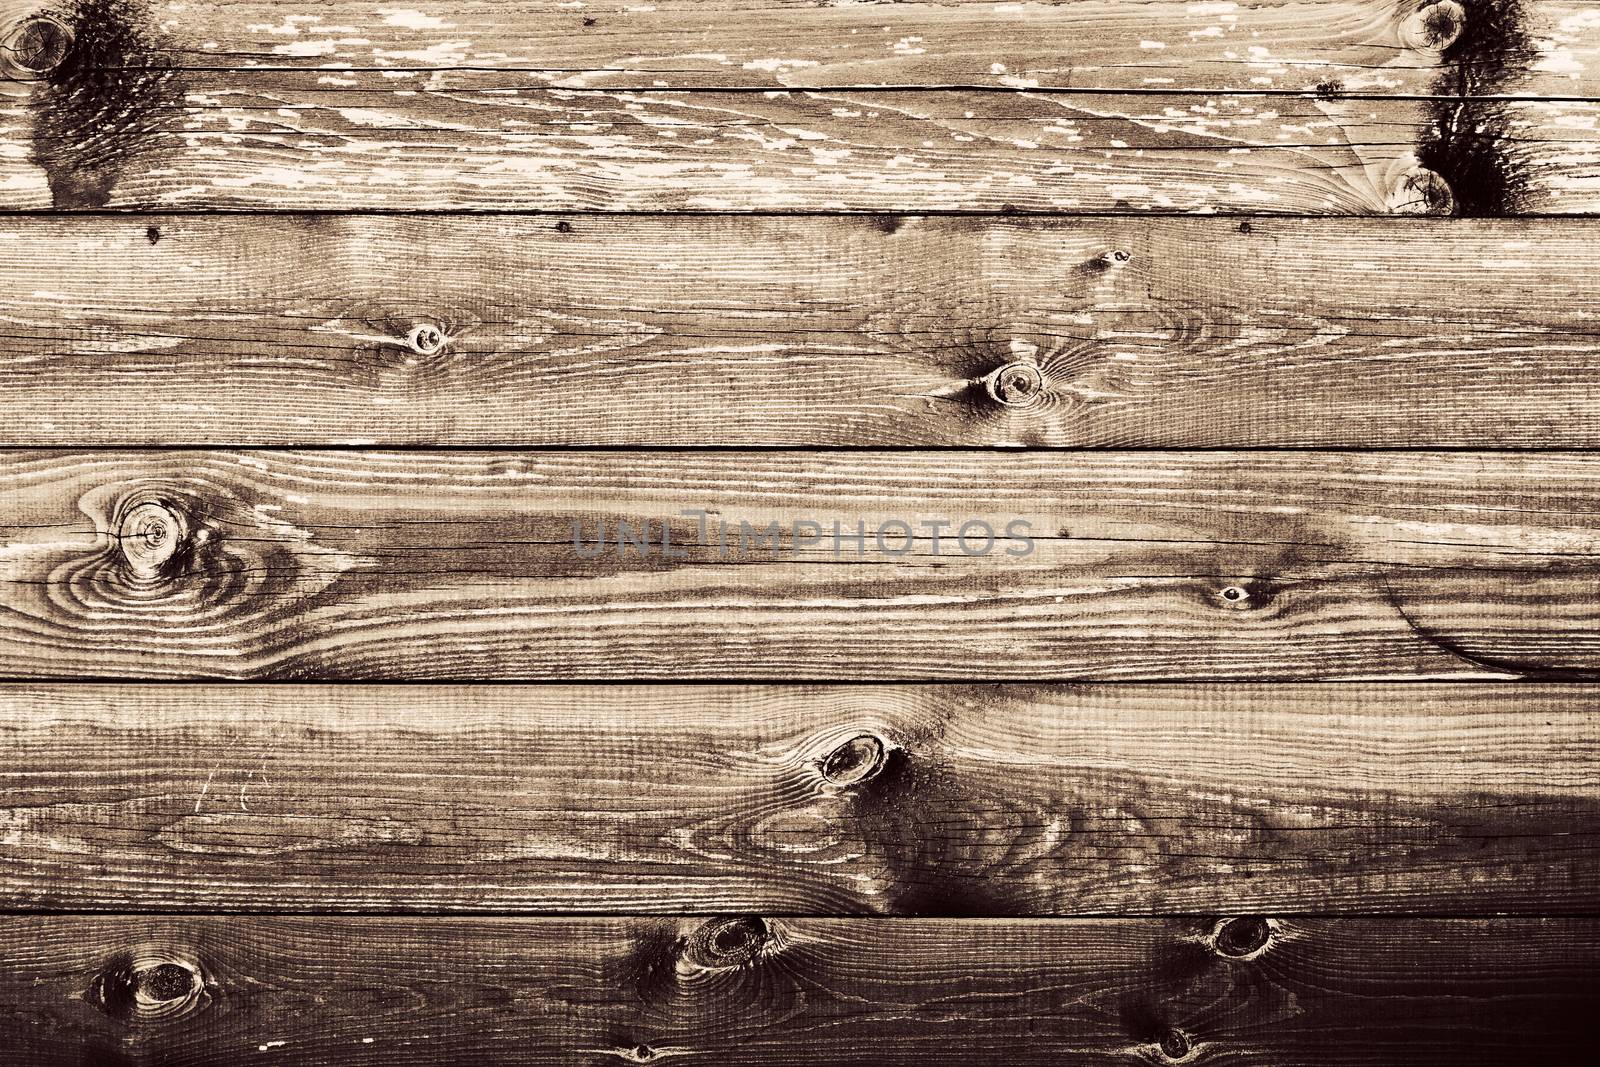 Grunge rustic wood wall, vintage background. High details, hd quality.